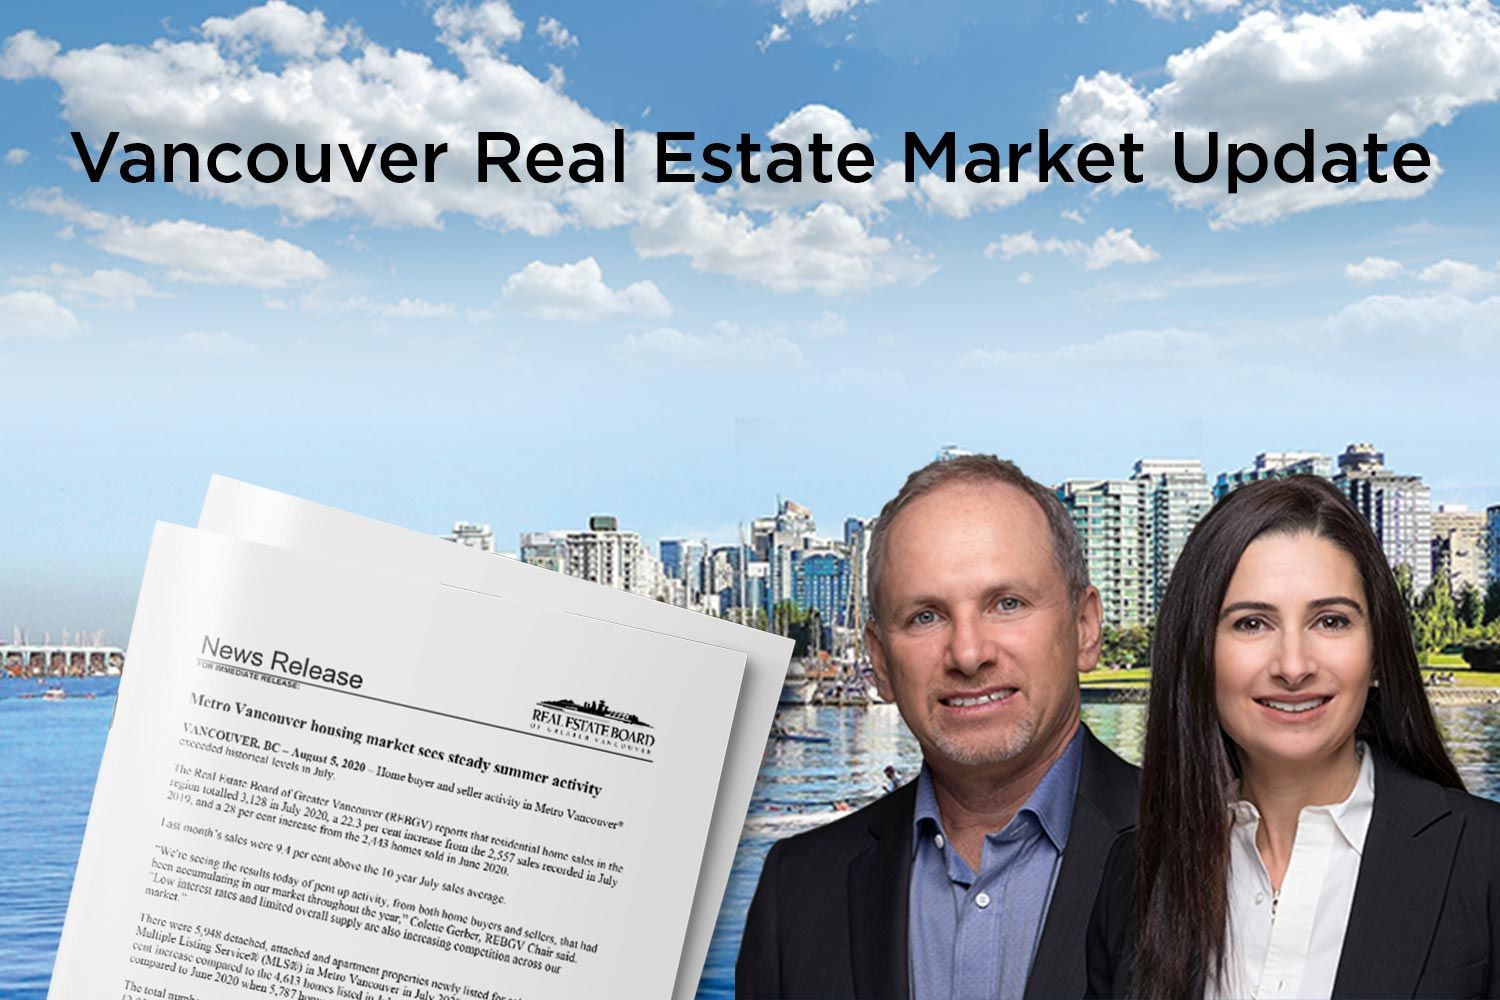 Metro Vancouver housing market sees steady summer activity